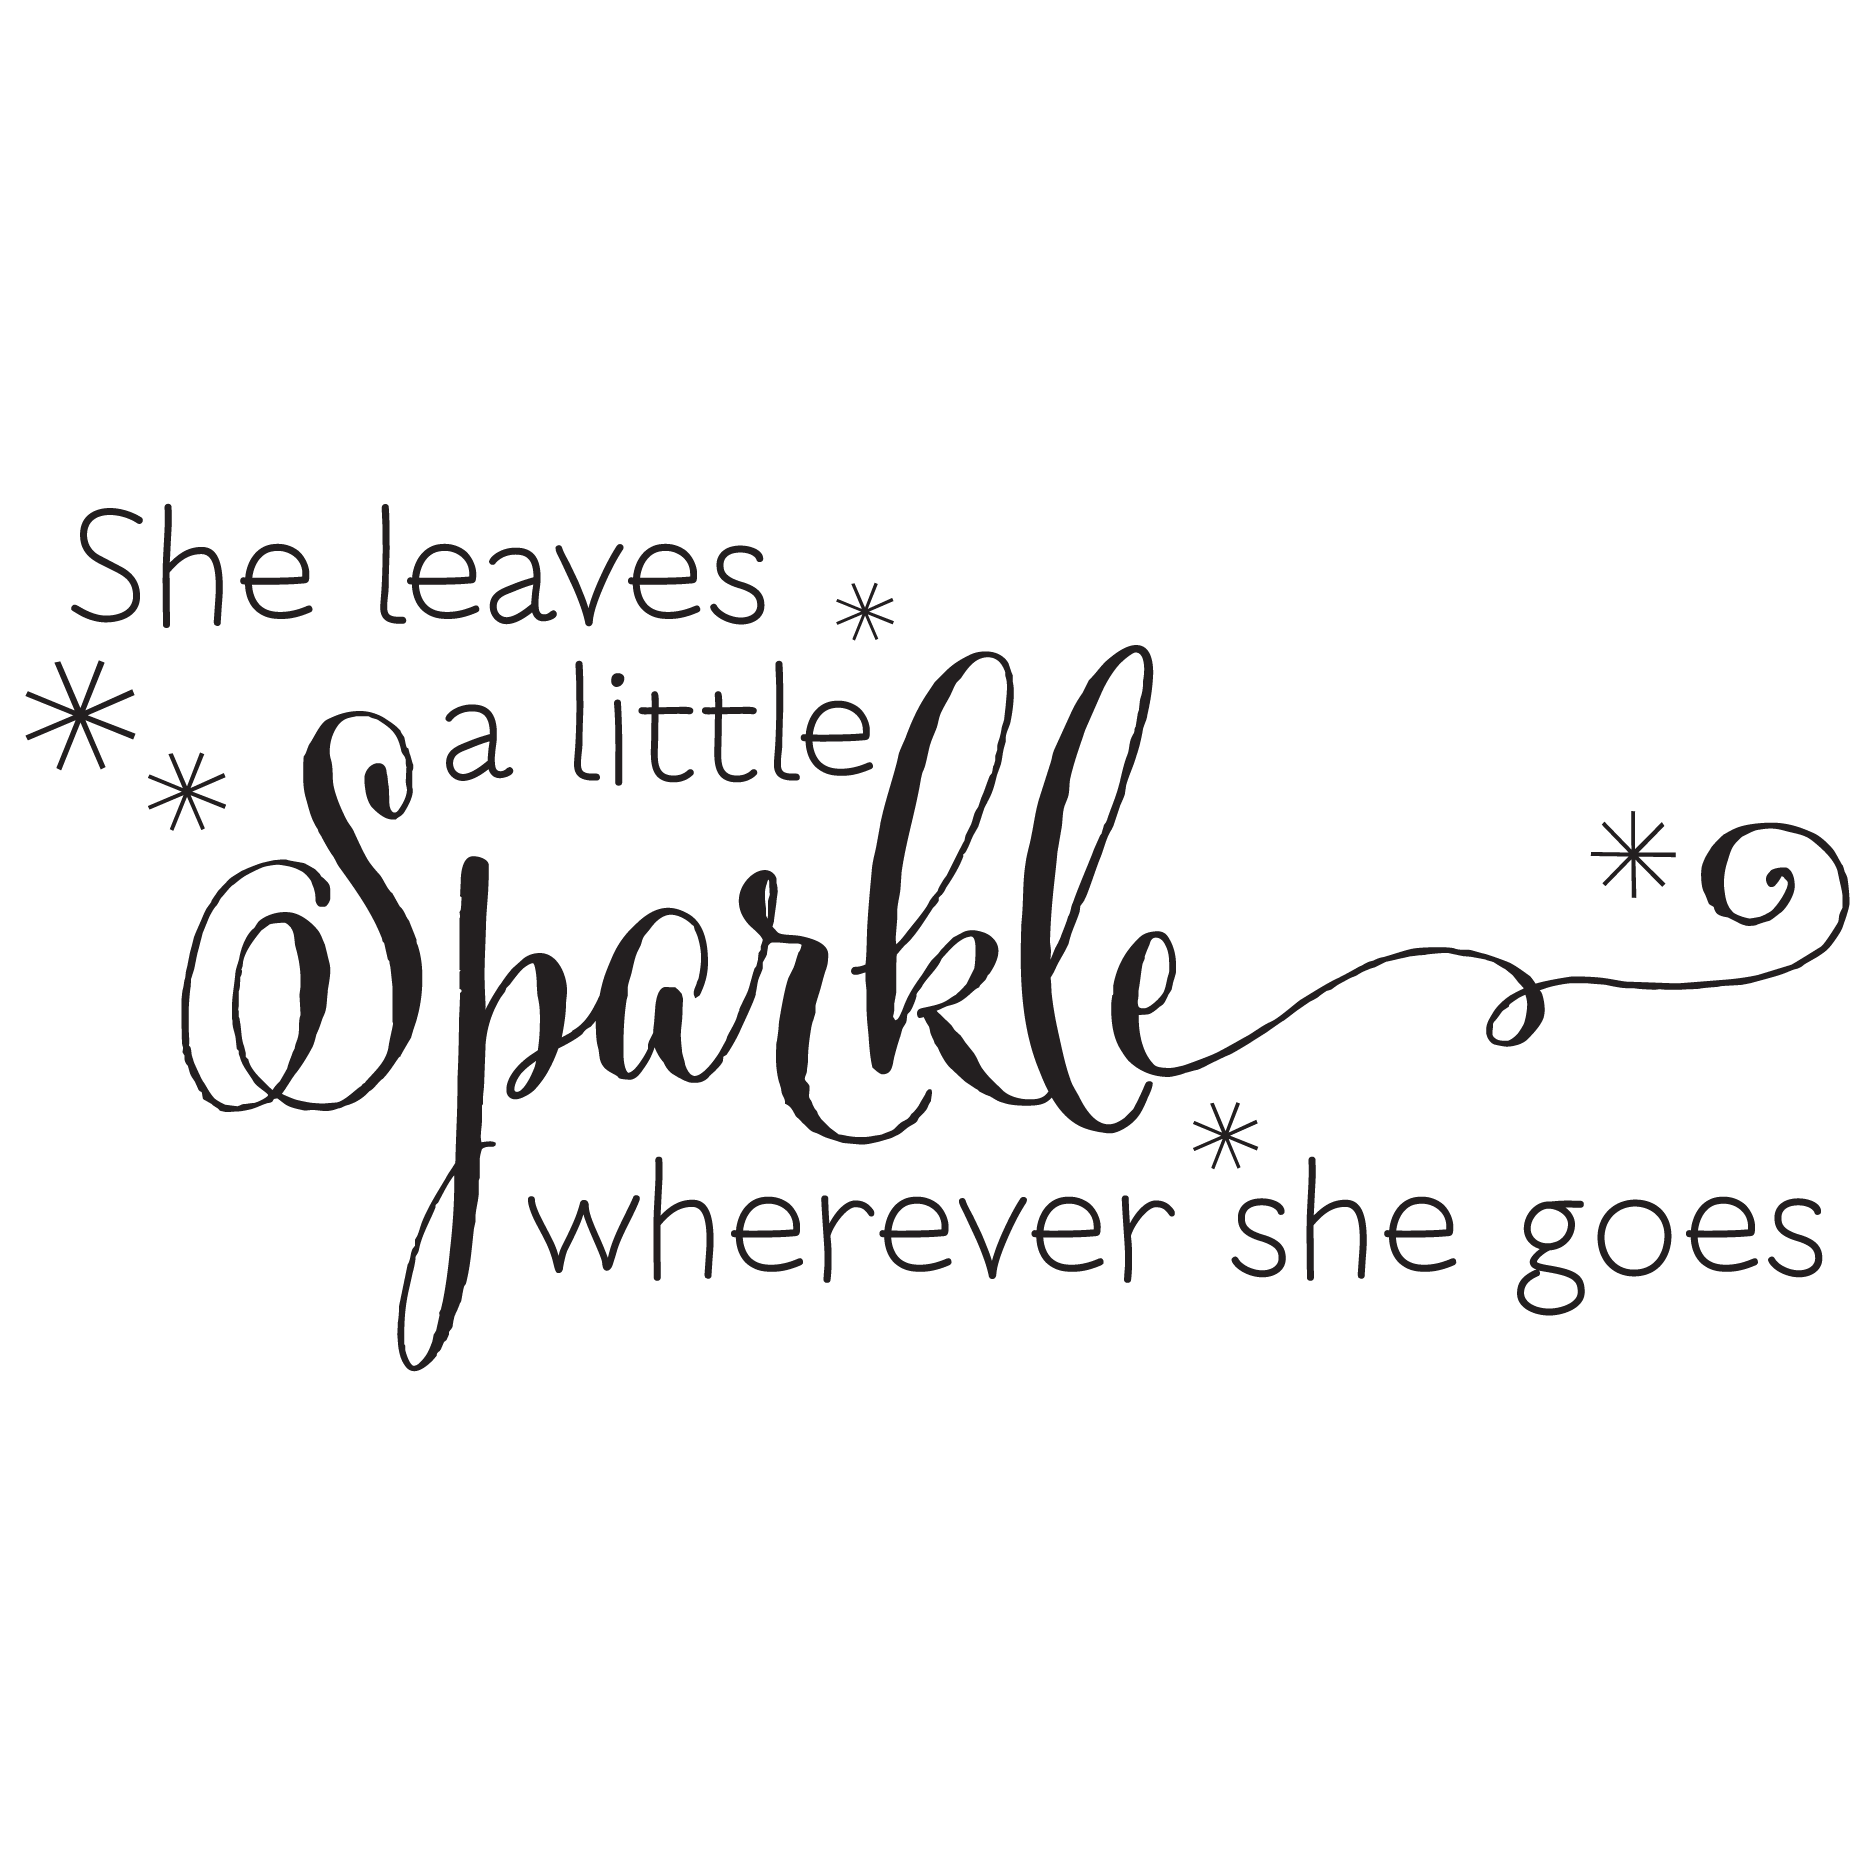 free sparkle quotes svg